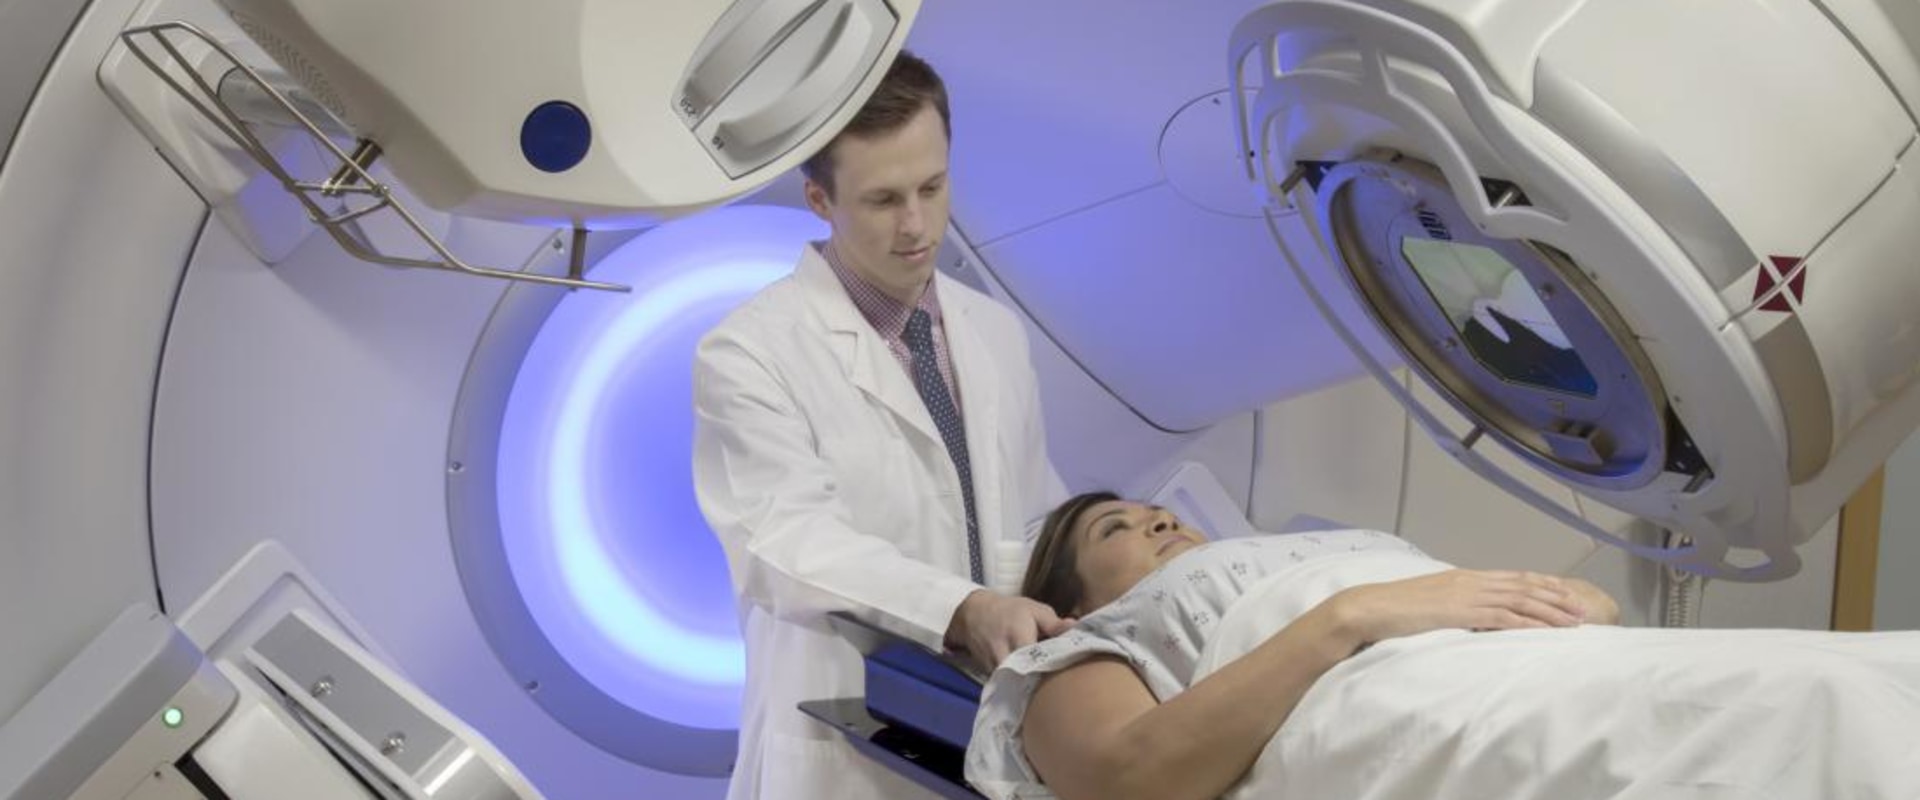 Radiation Therapy: What is it and How Does it Affect Cancer?